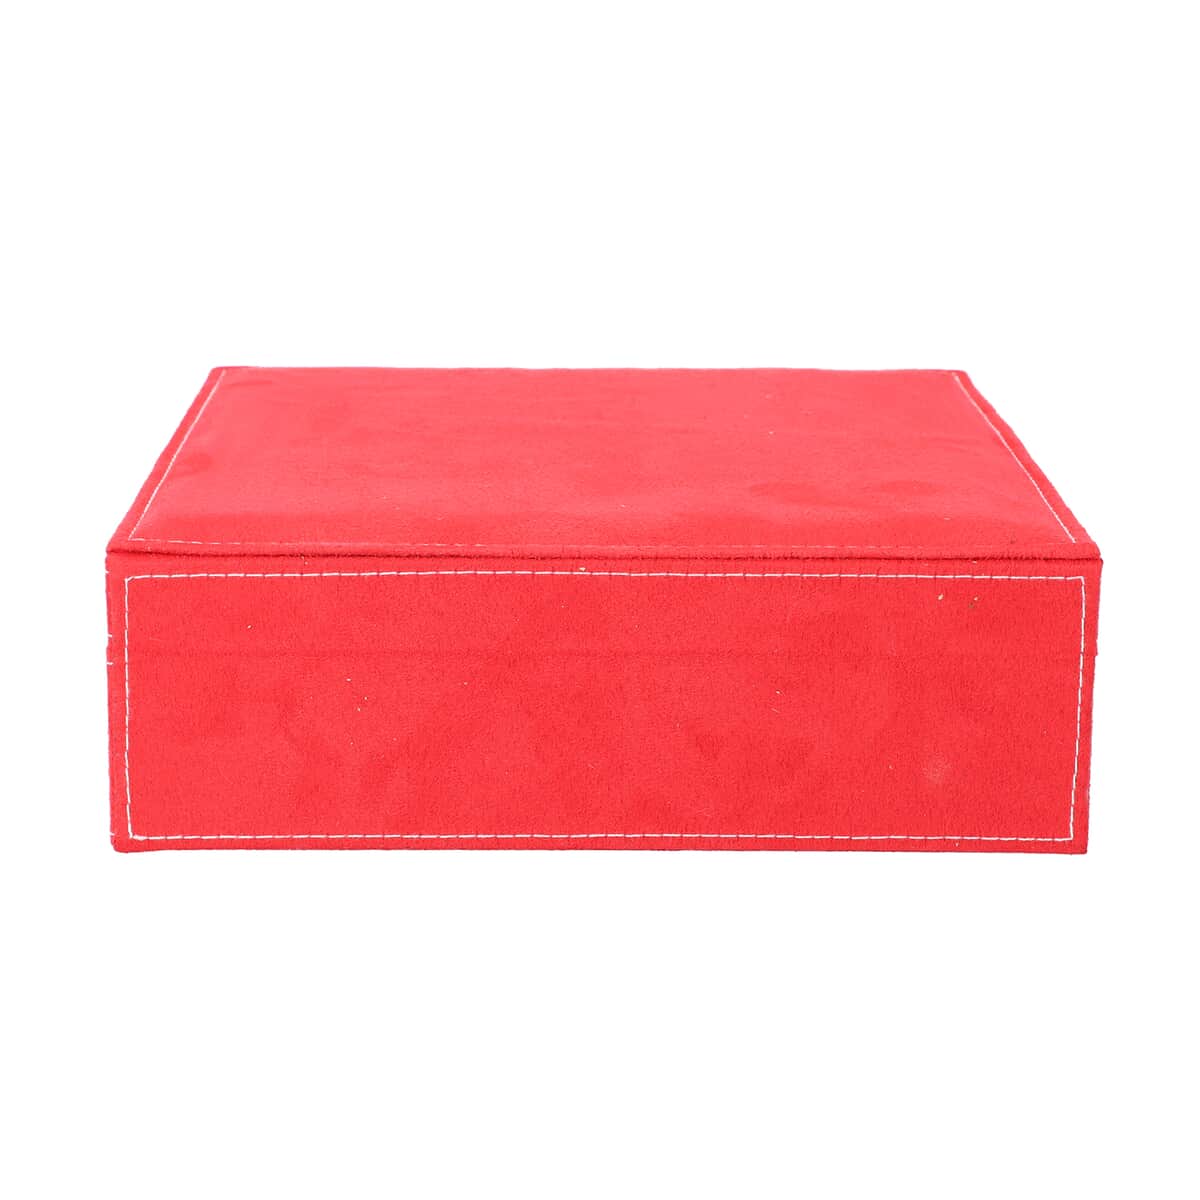 Red 2 Tier Velvet Jewelry Box with Anti Tarnish Lining & Lock (8 Necklace Hooks, 5 Bracelet Sections and Approx 54 Rings Slots) image number 3